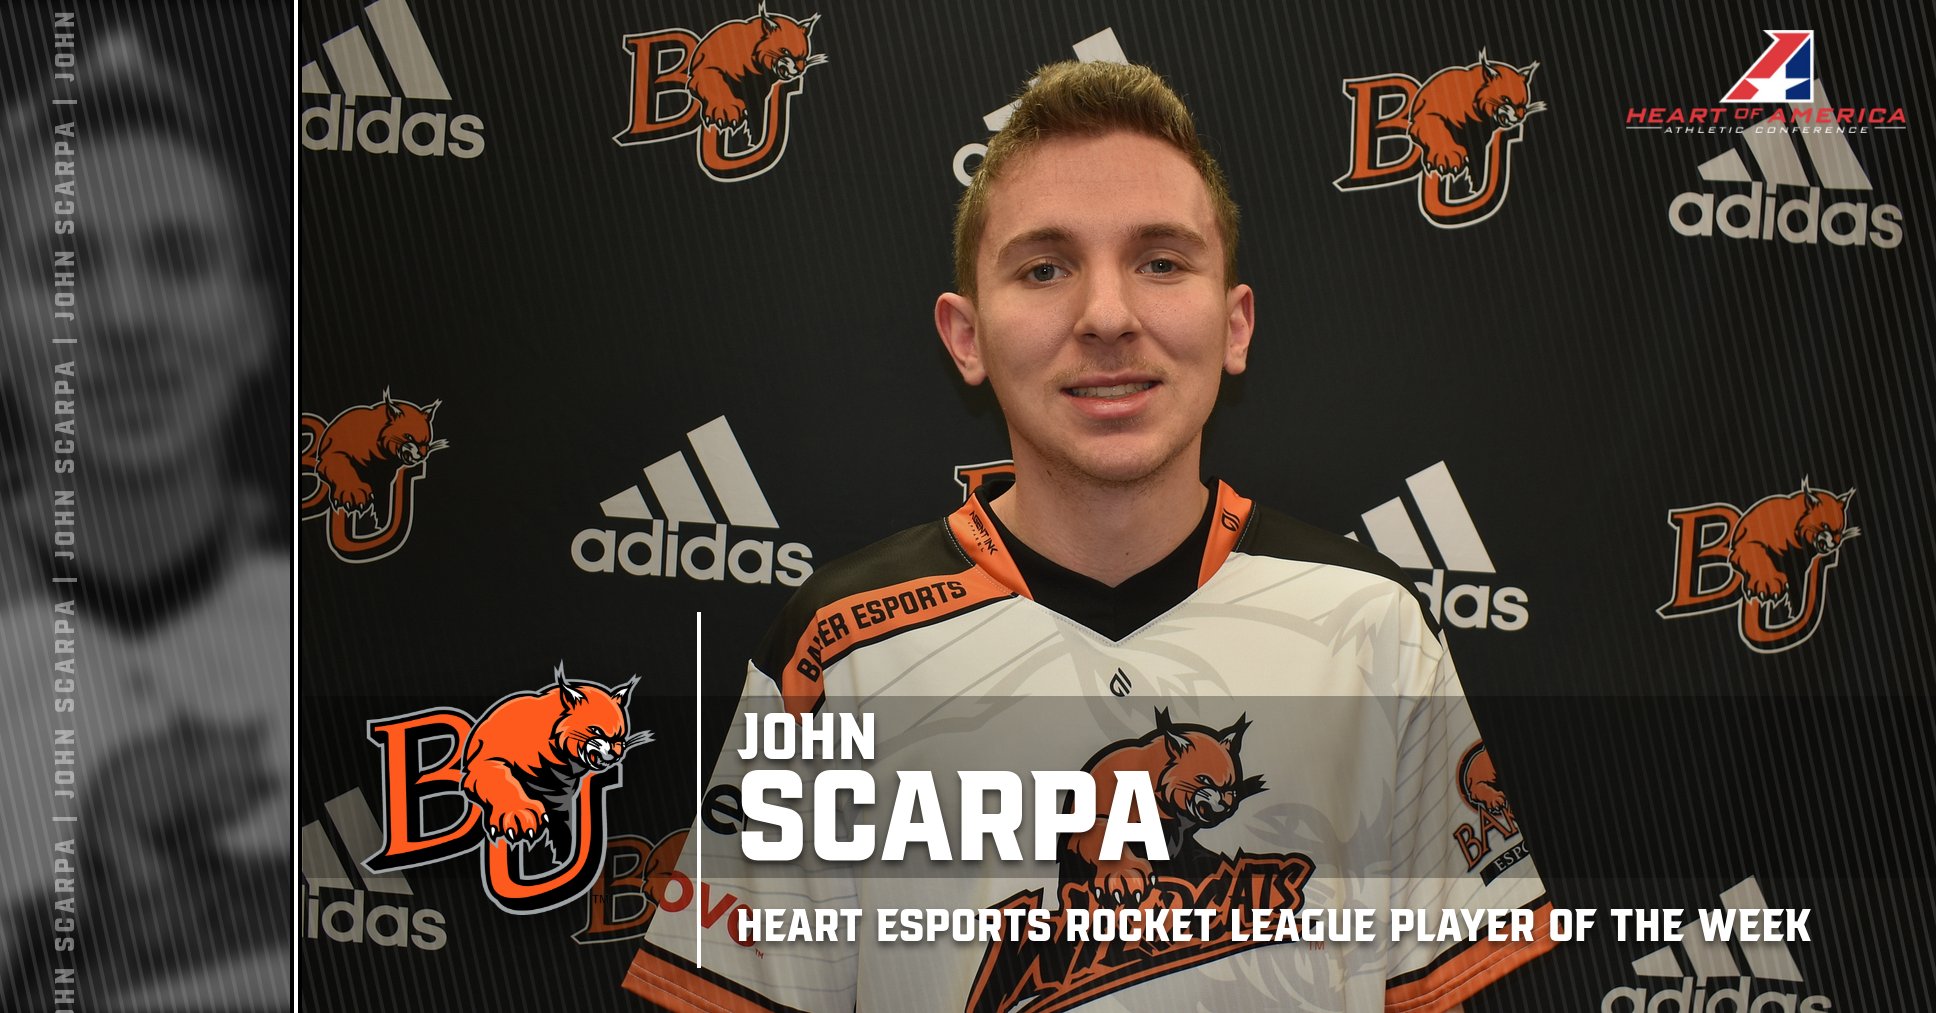 Scarpa Named Heart Esports Rocket League Player of the Week